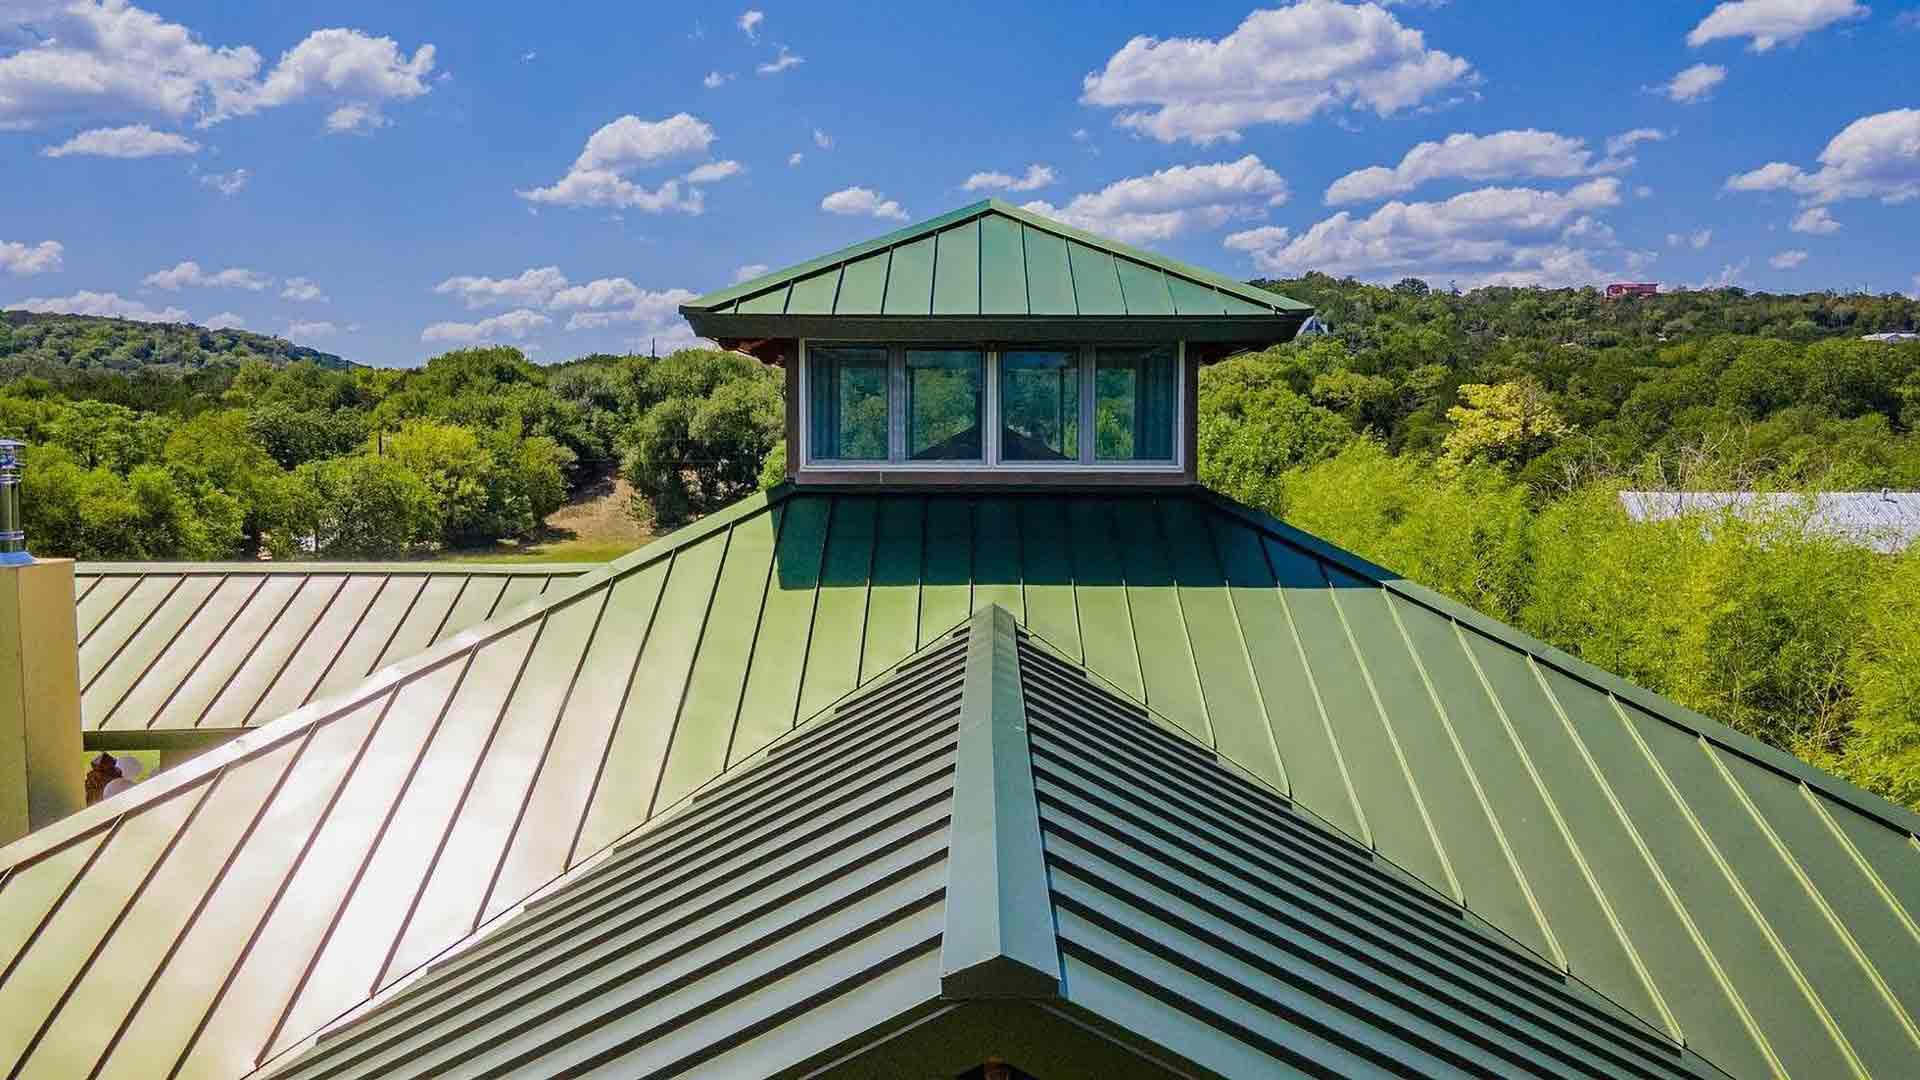 Aluminum Roofing: The Pros & Cons